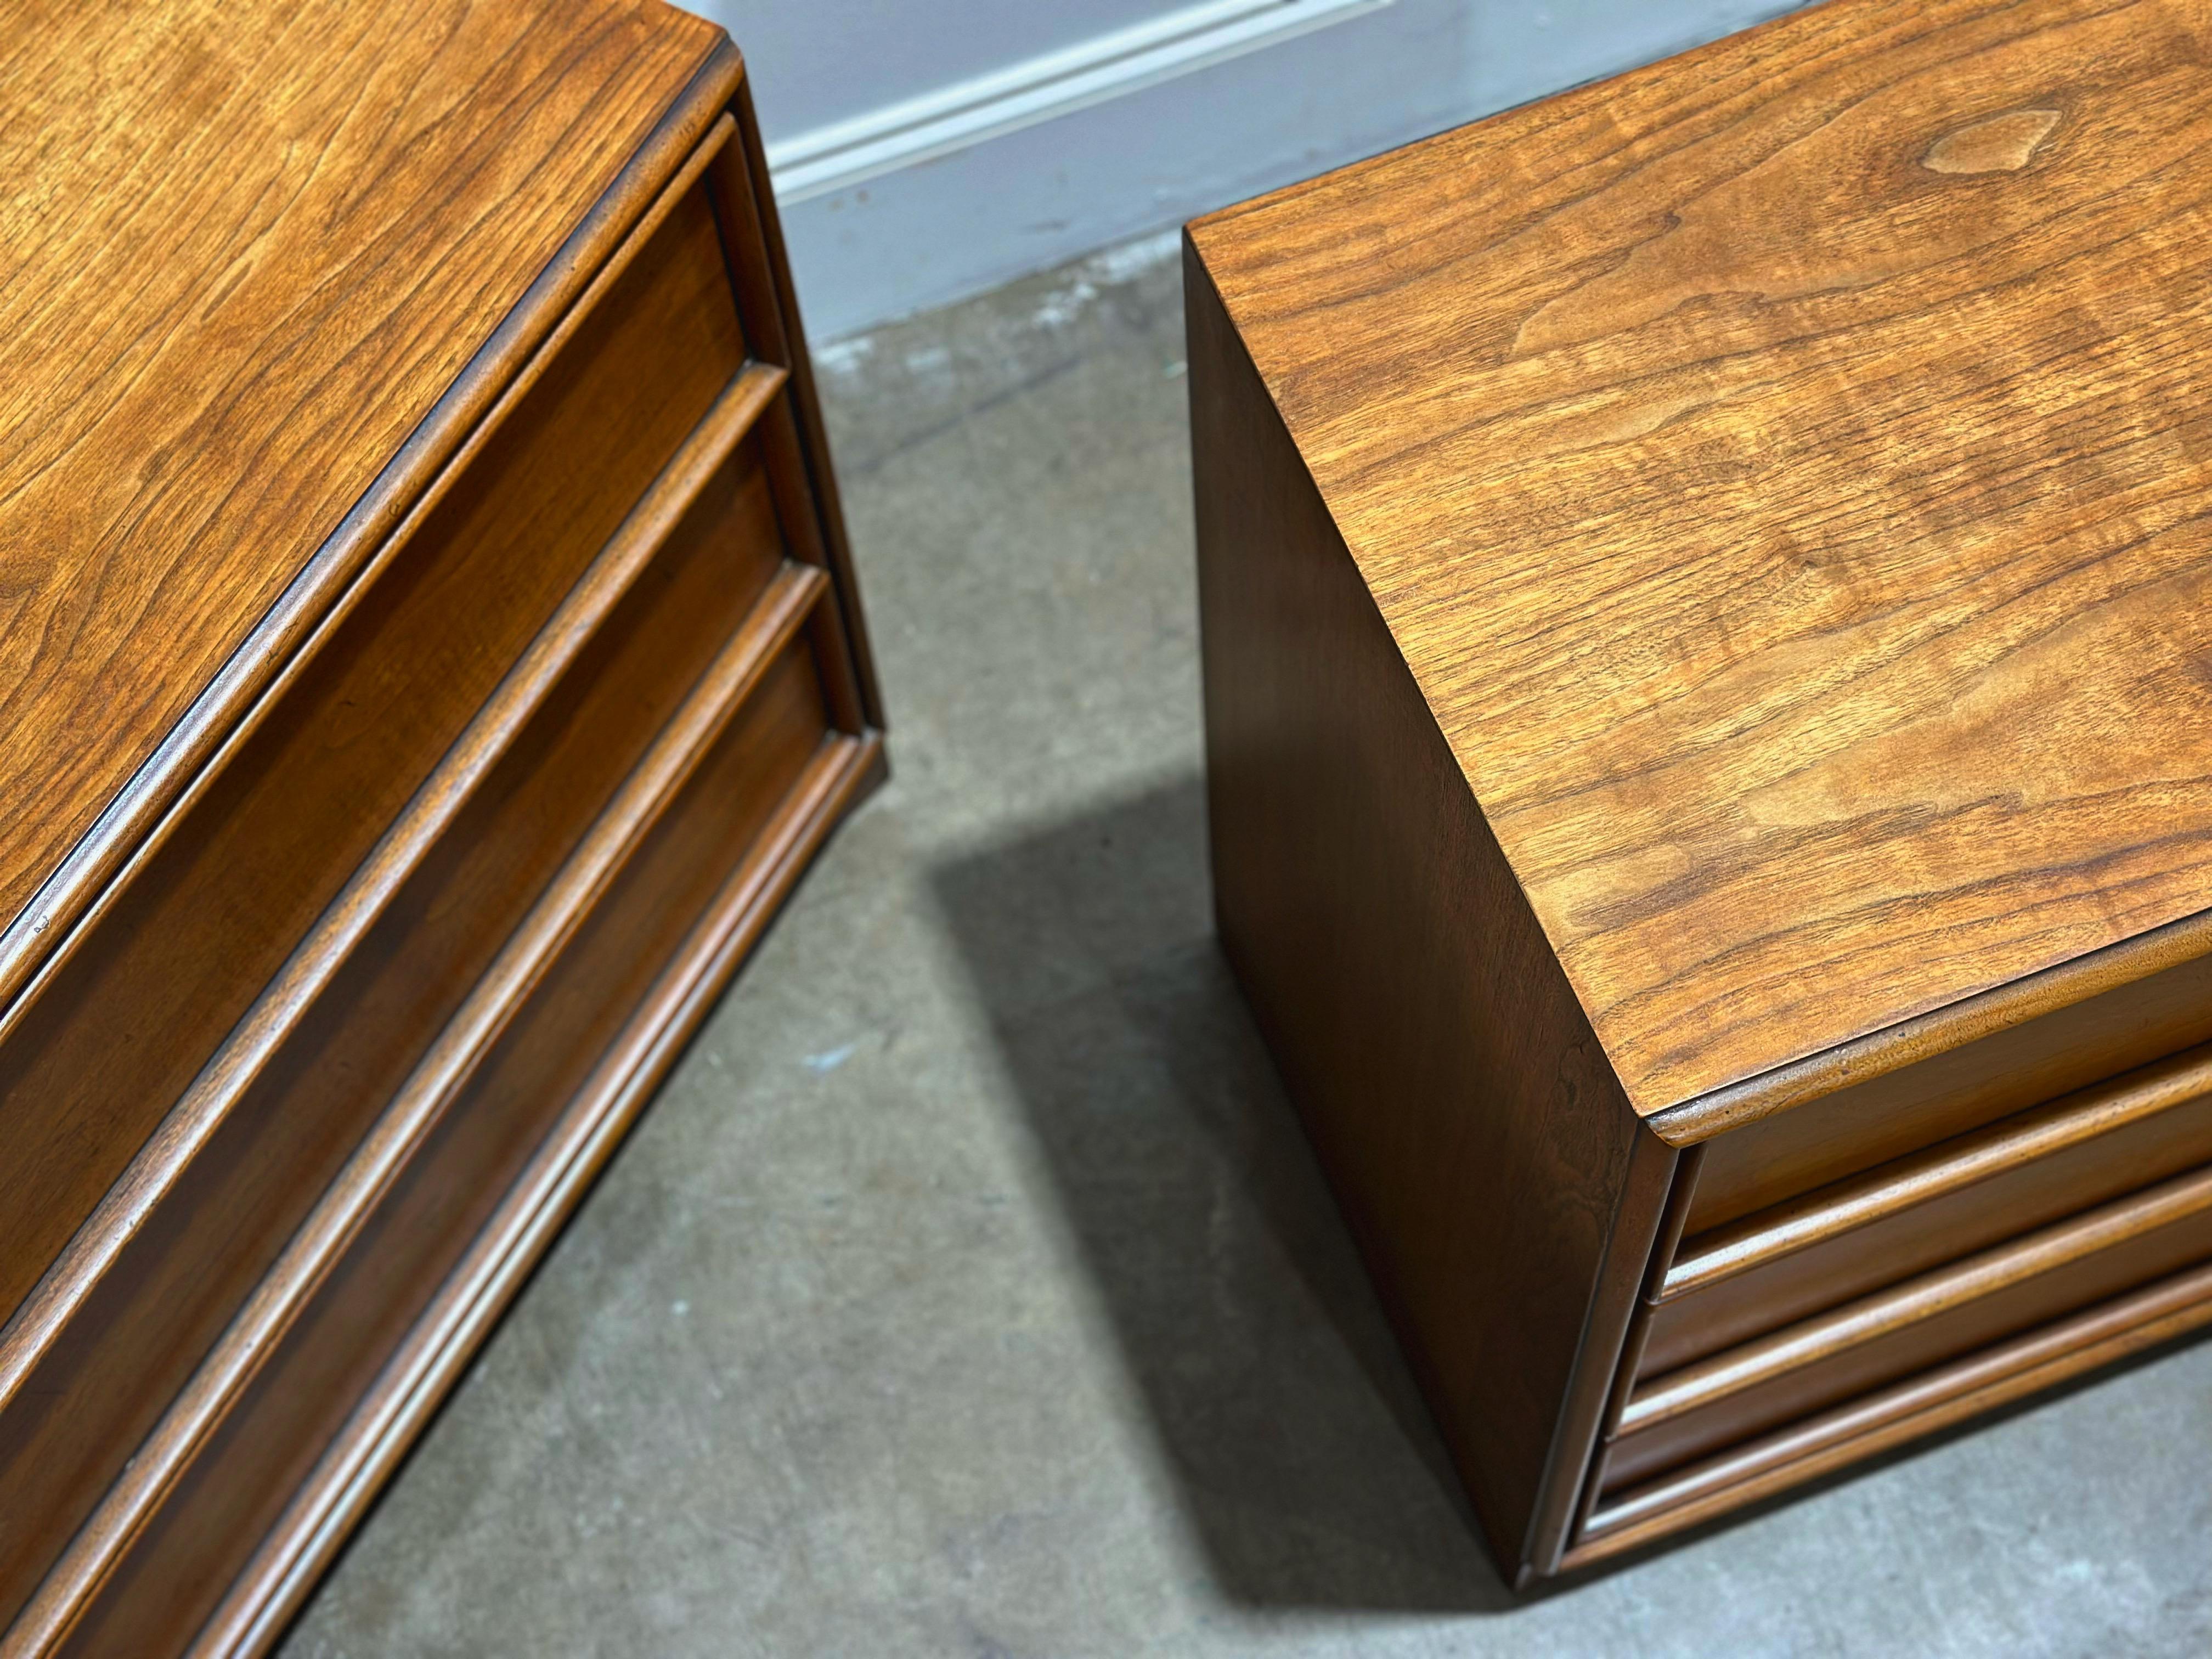 Mid-20th Century Pair Dresser Chests by TH Robsjohn Gibbings for Widdicomb - Walnut Nightstands